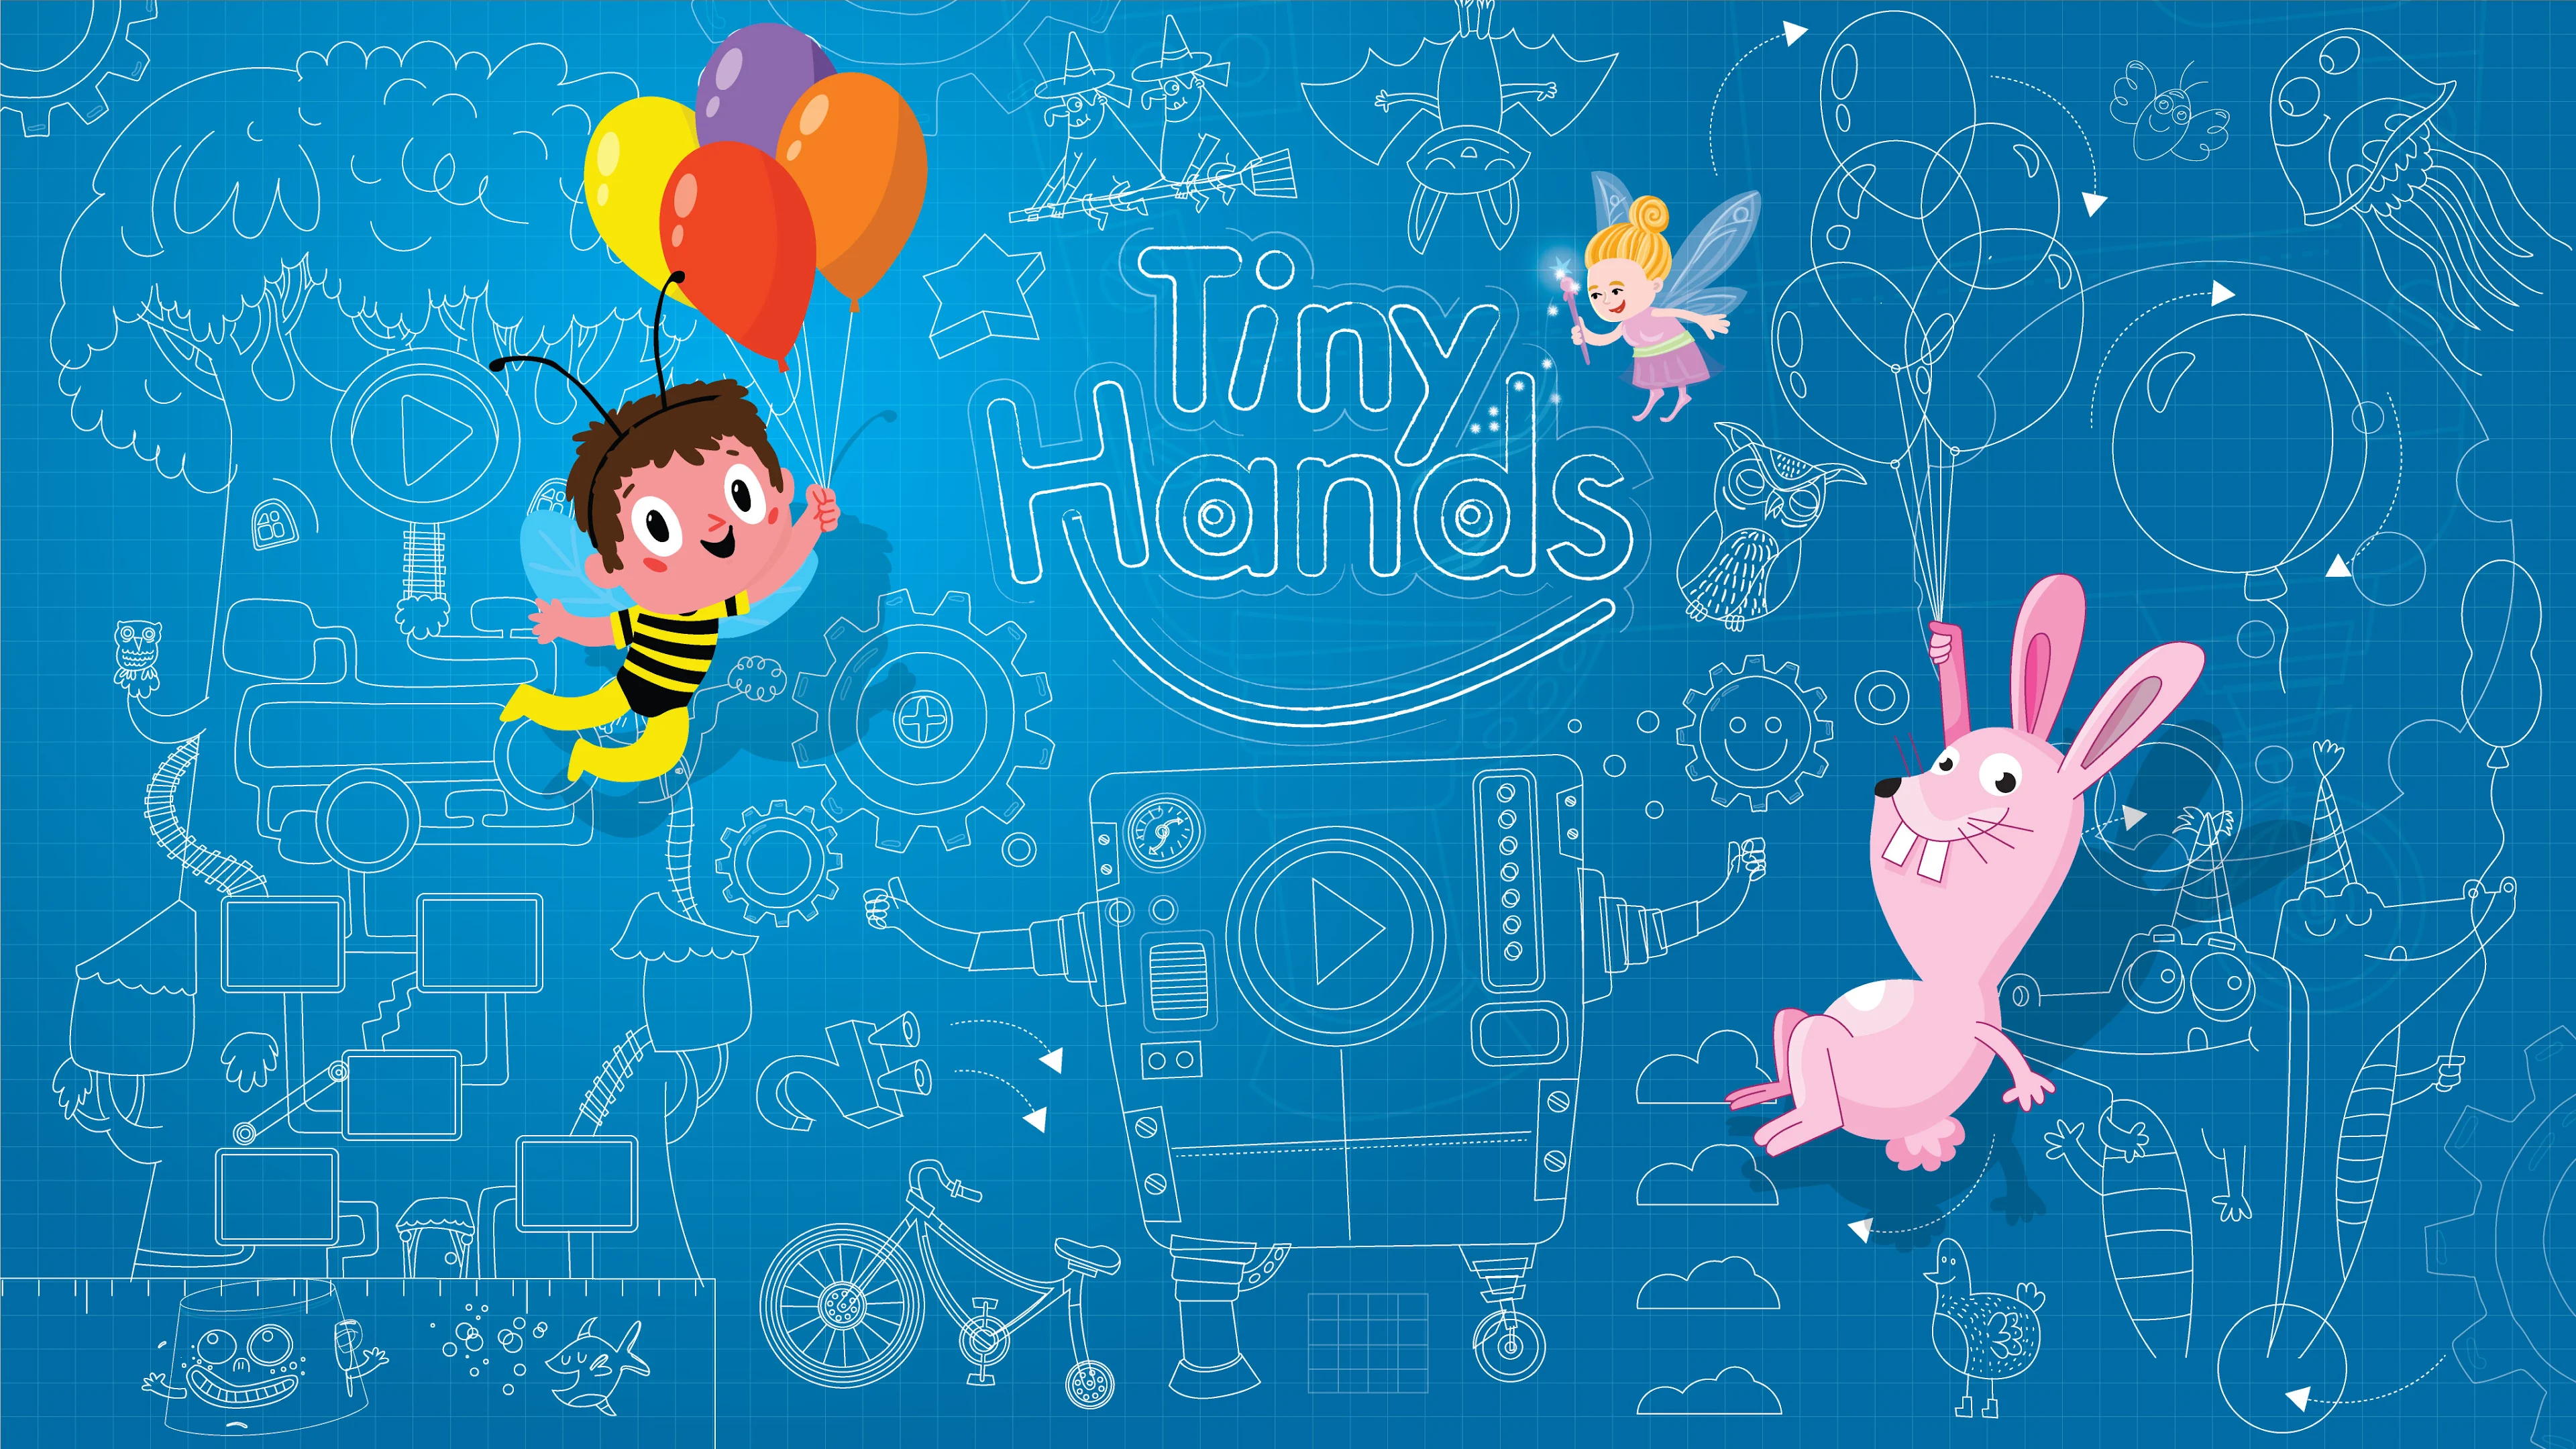 Android Apps by TinyHands Educational games for Babies & Toddlers